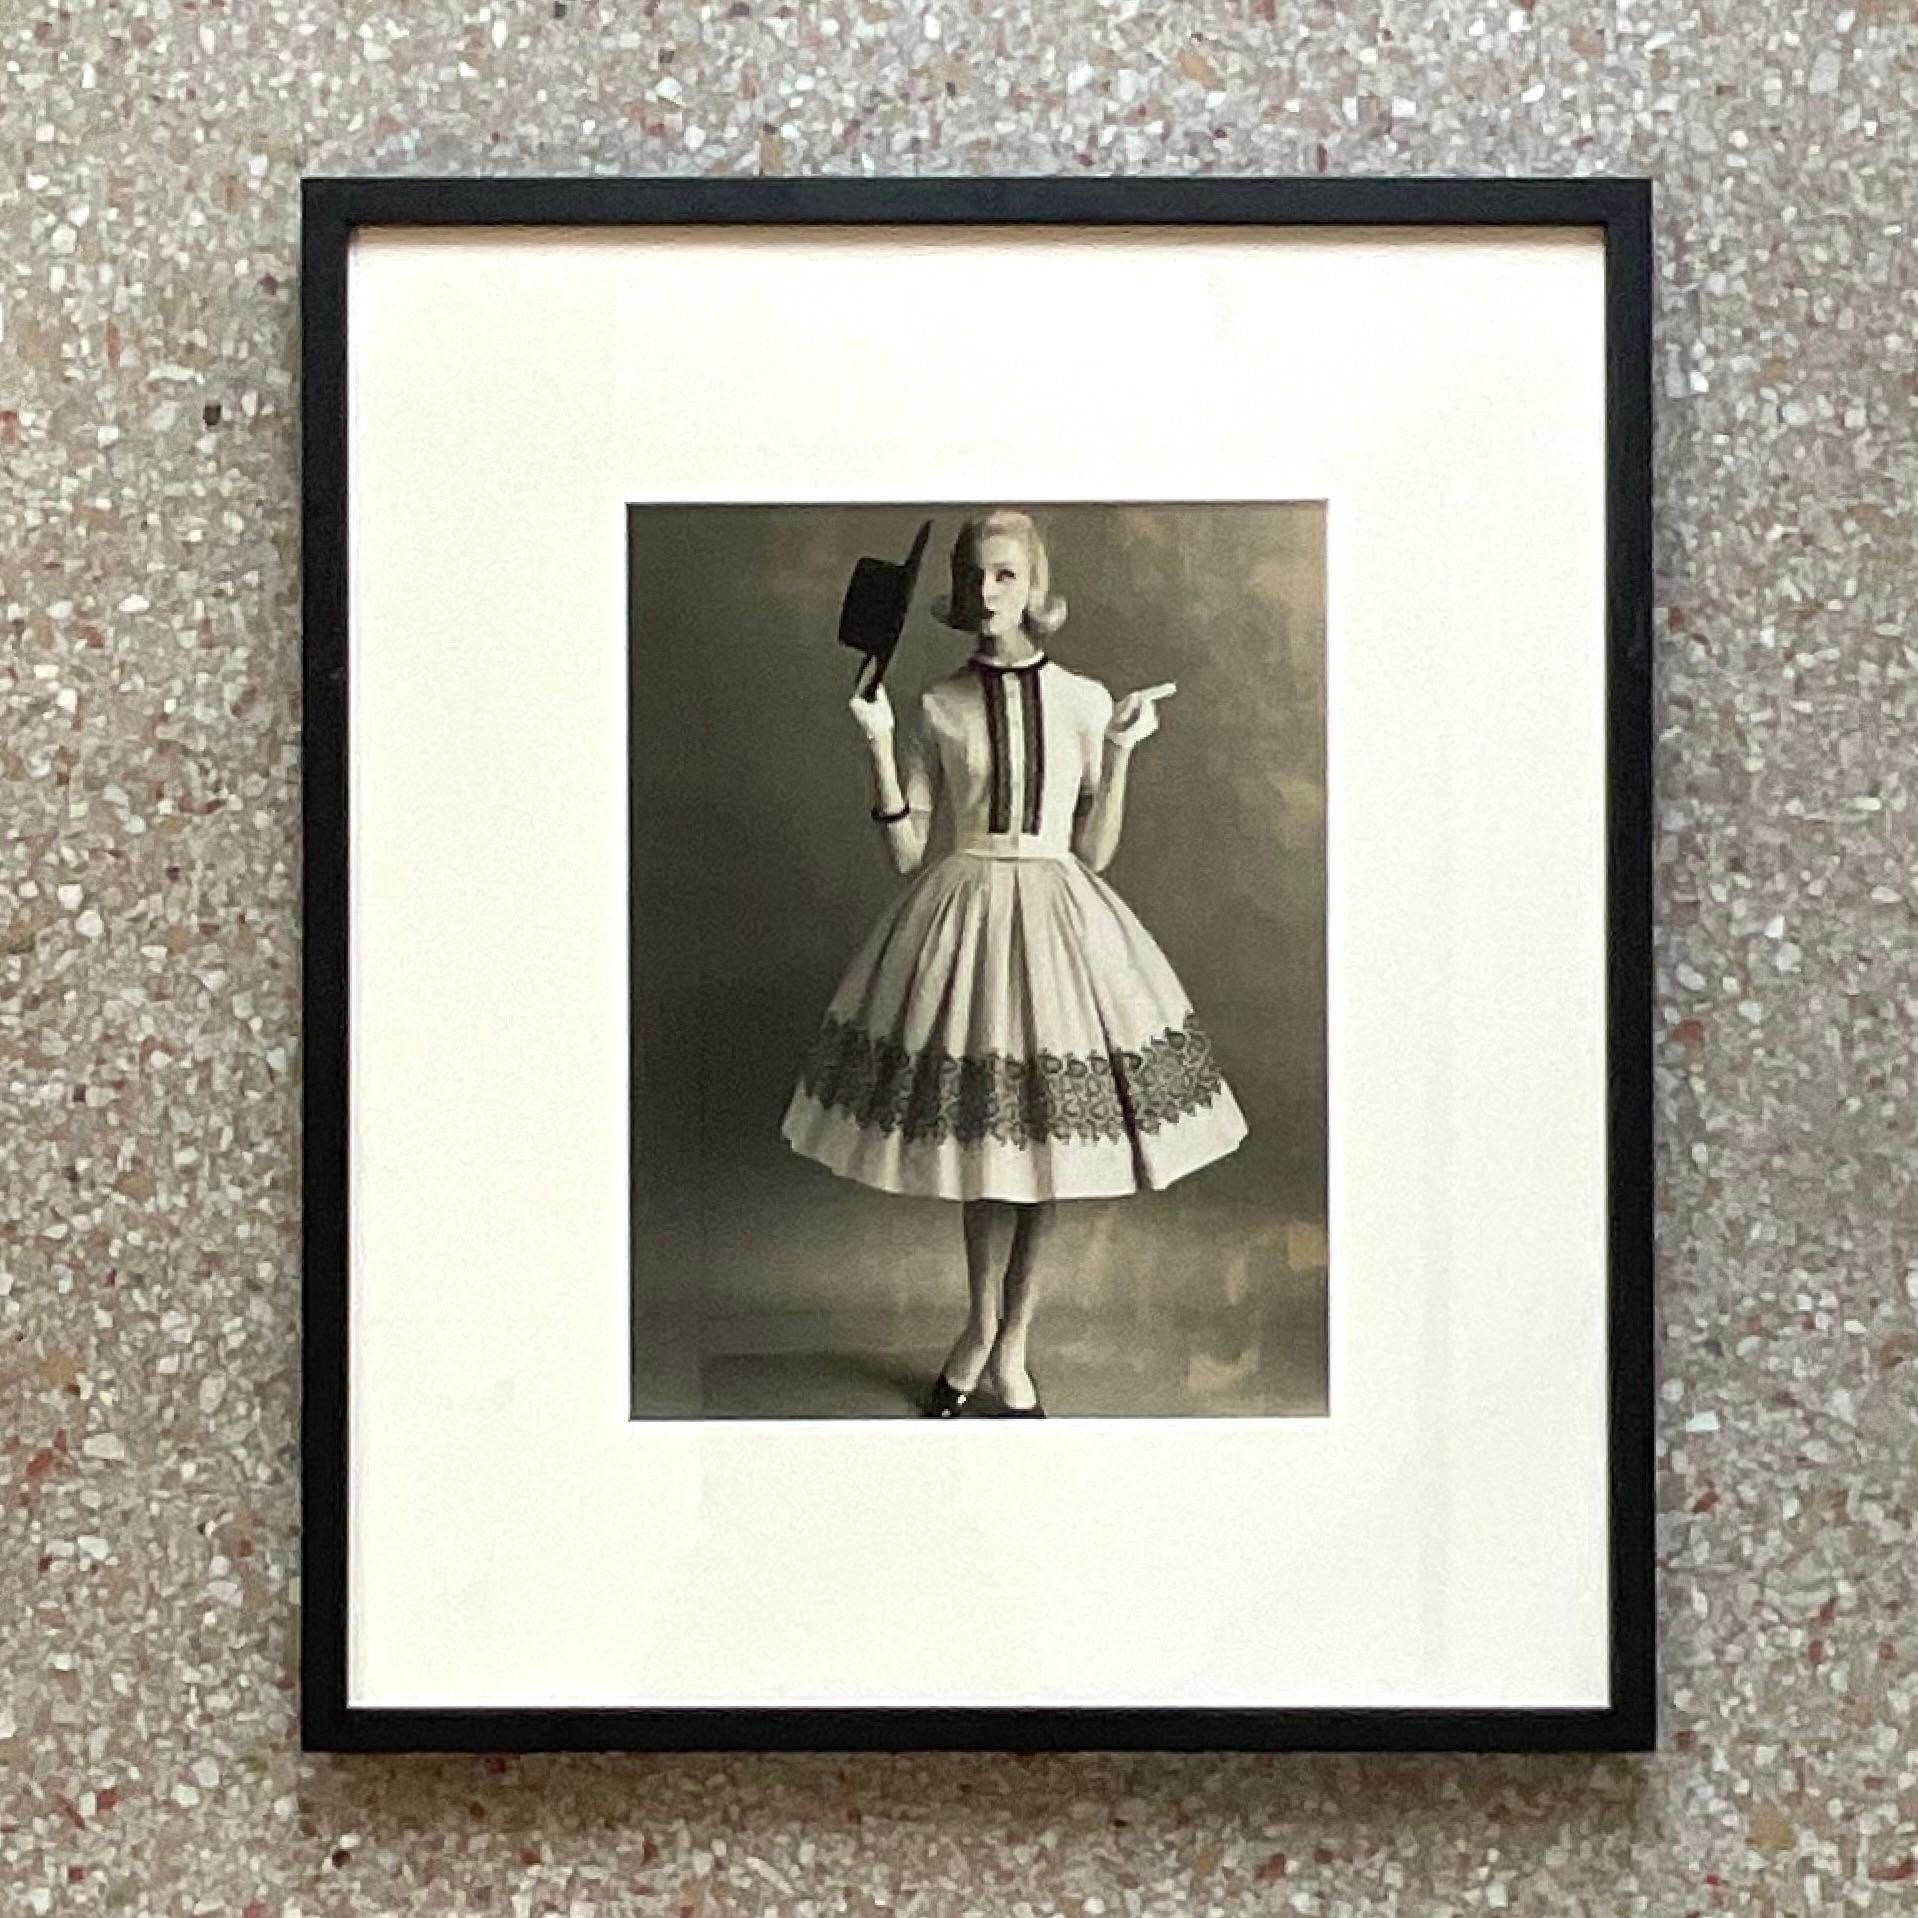 A fantastic vintage Boho original photograph. A chic 1960s fashion image of a young model. Acquired from a Palm Beach estate.